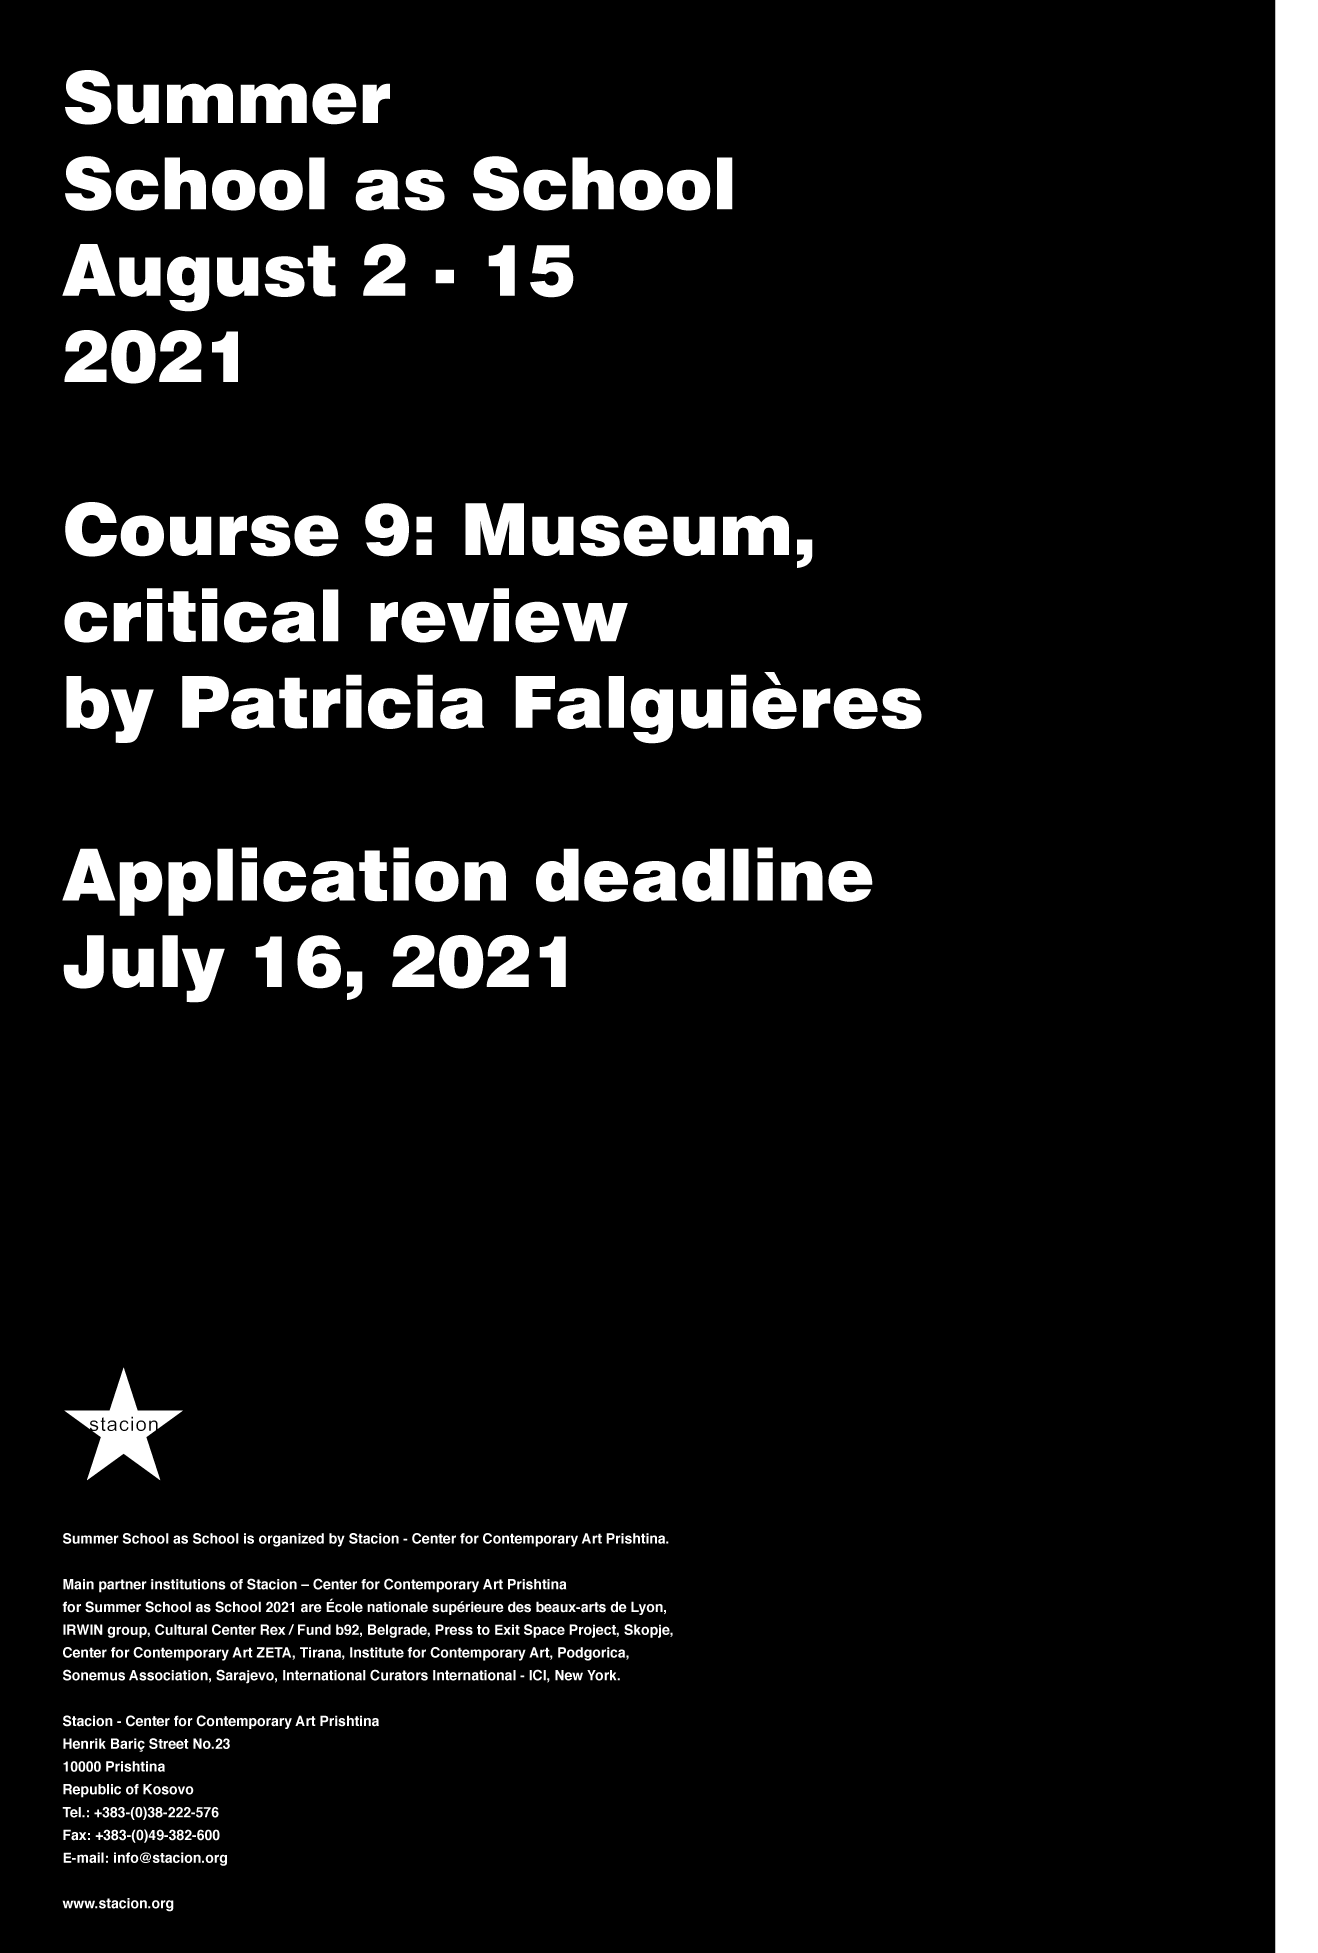 Course 9: Museum, critical review